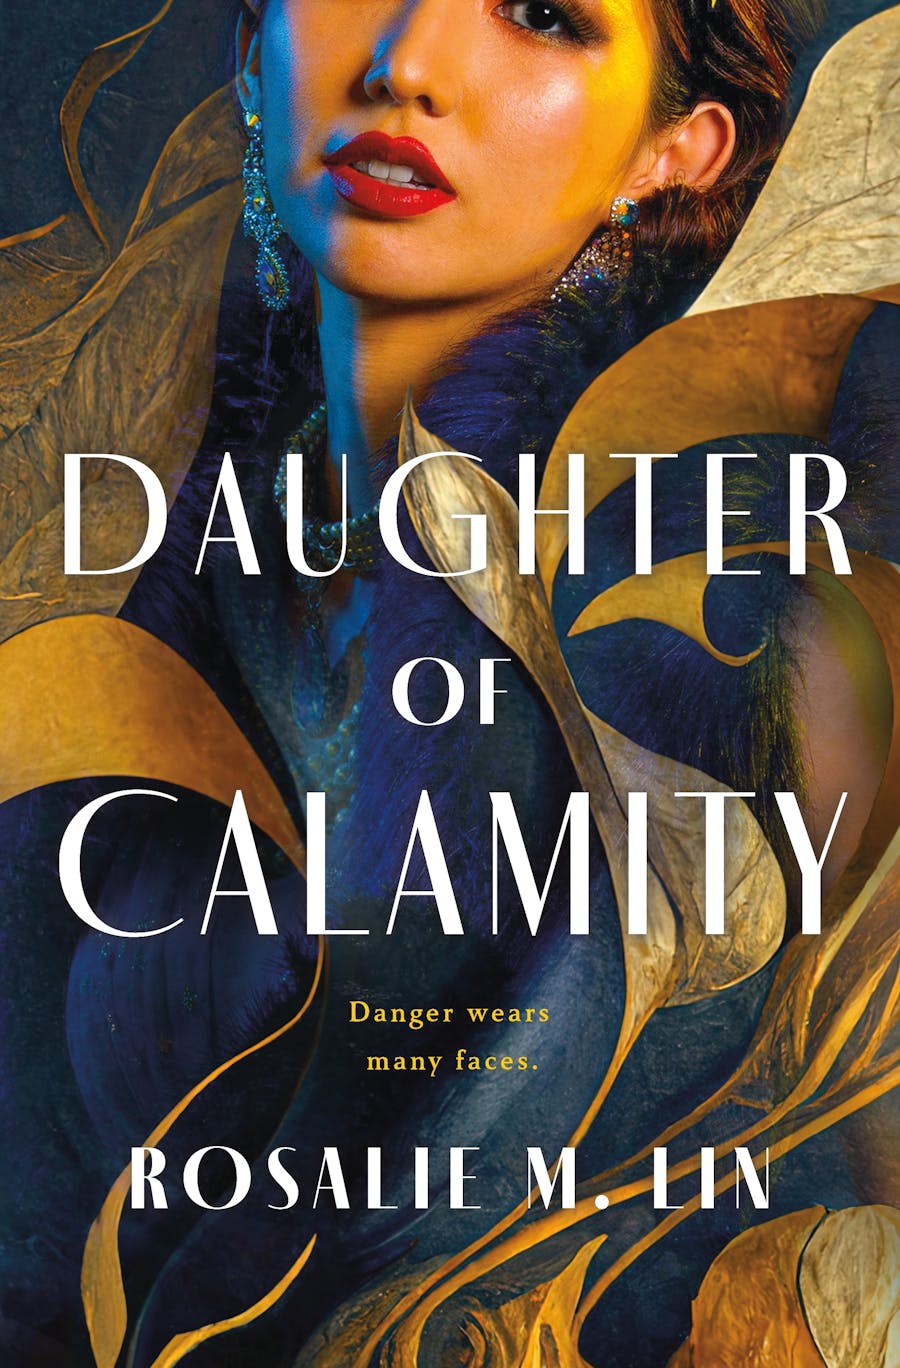 Book cover for Daughter of Calamity by Rosalie M. Lin featuring illustration of Chinese woman against a dark backdrop featuring gold leaves and white title and author text